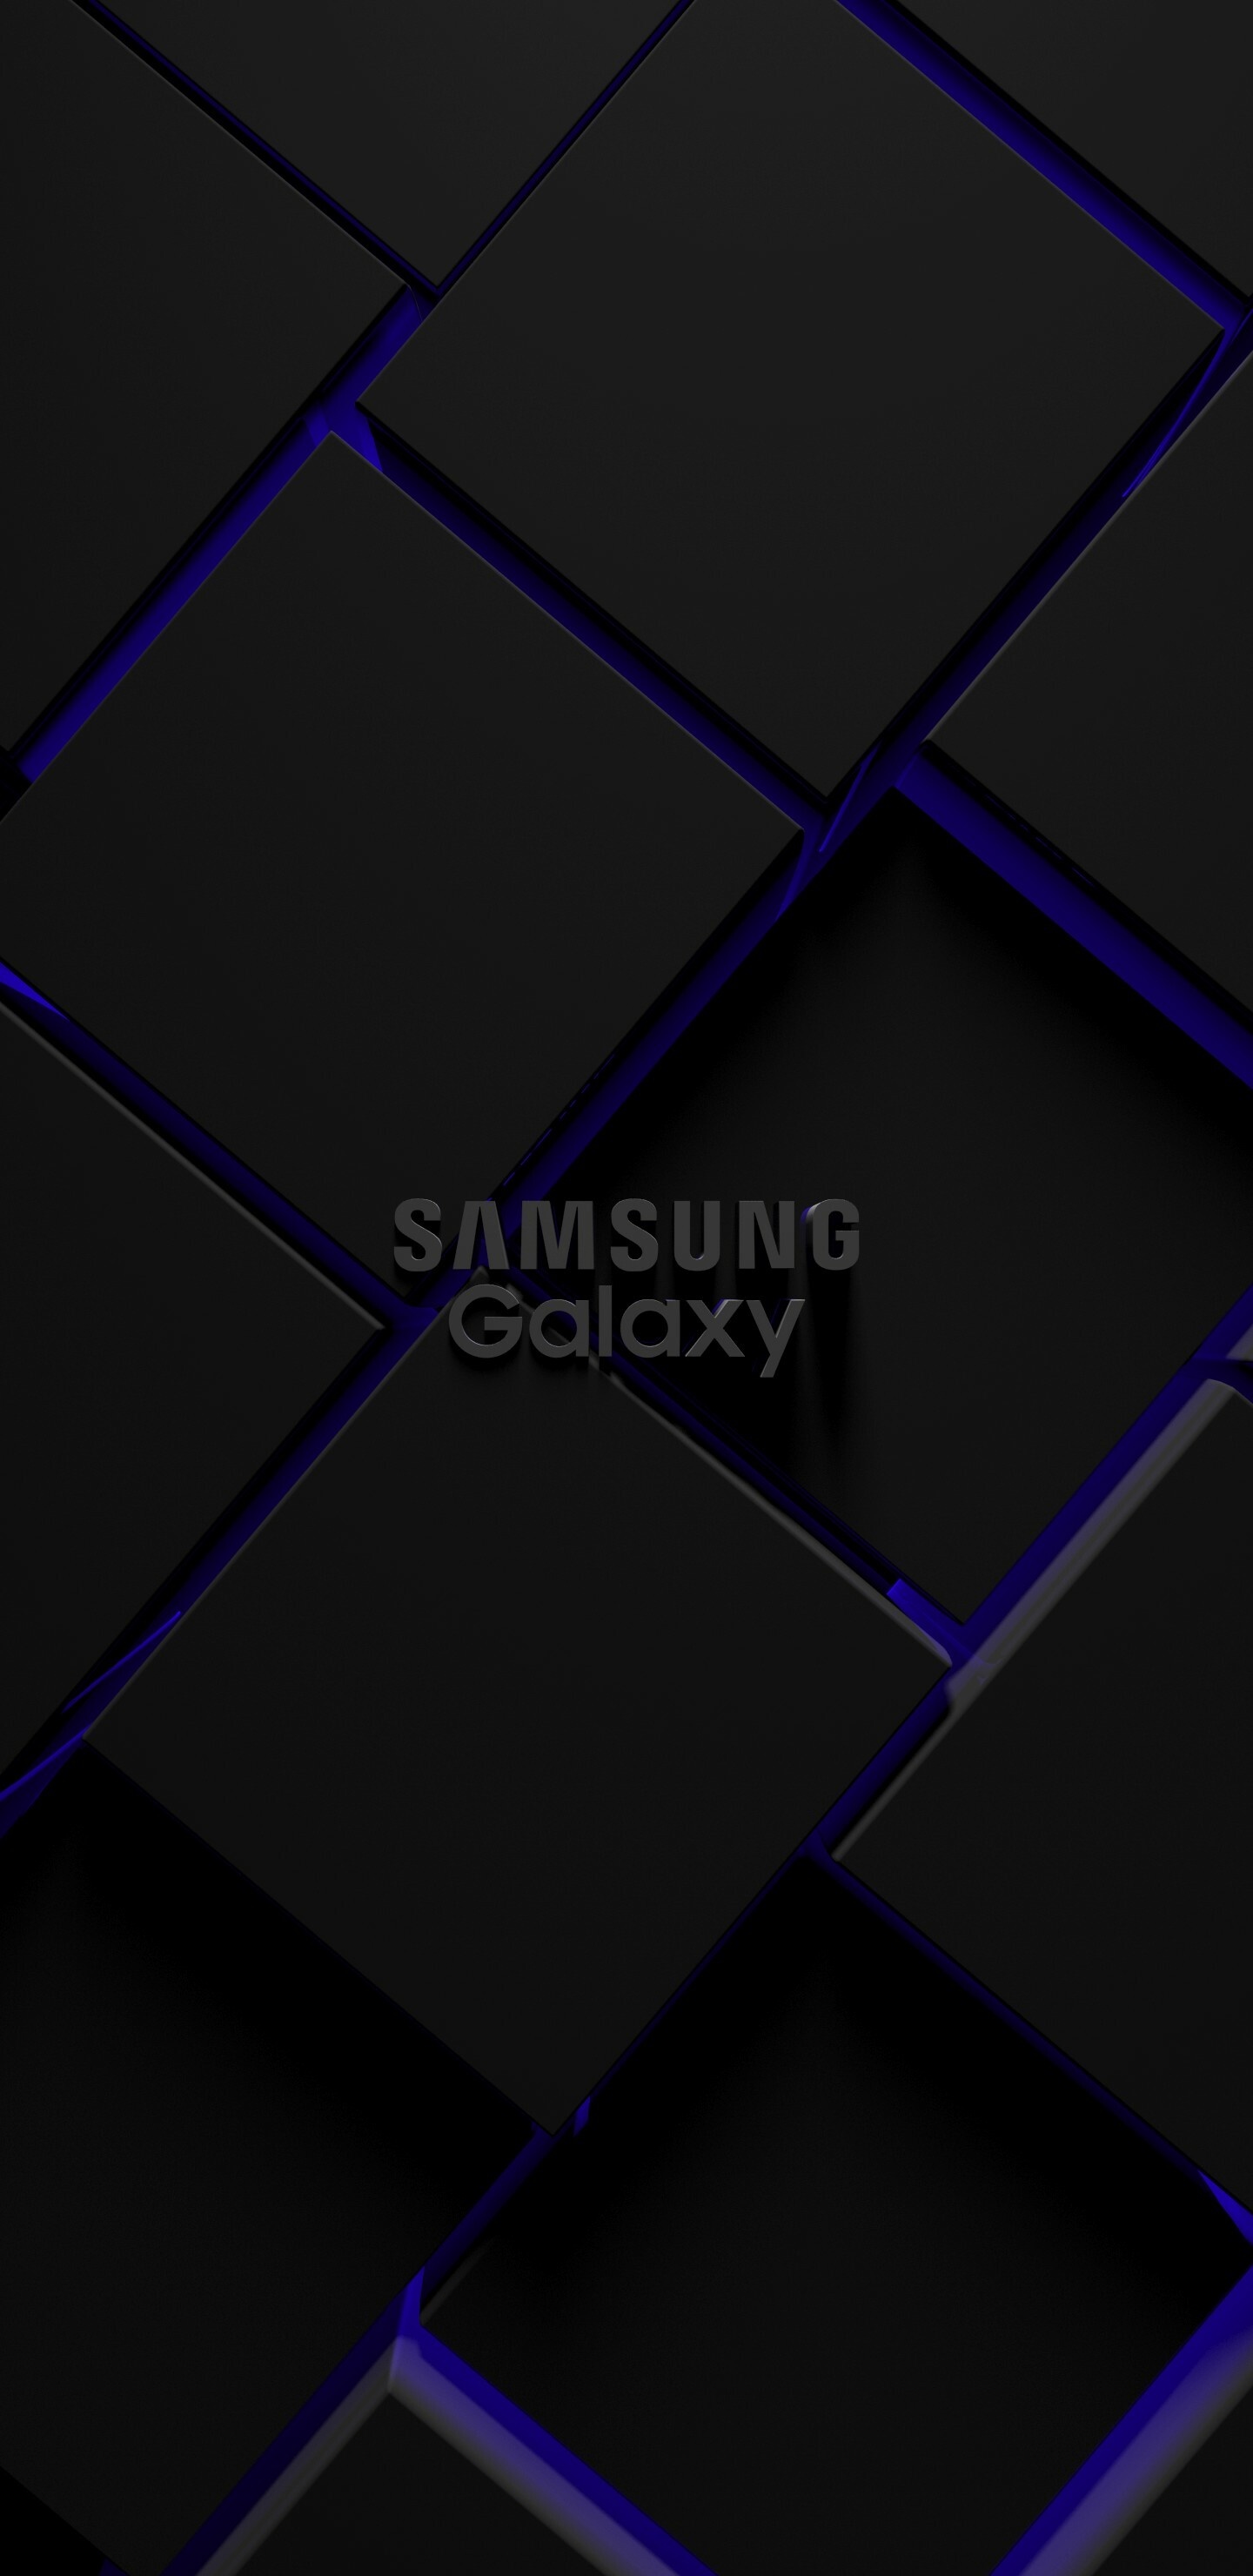 Samsung: One of the most popular phone manufacturer, Flagship smartphones, The greatest tech. 1440x2960 HD Wallpaper.